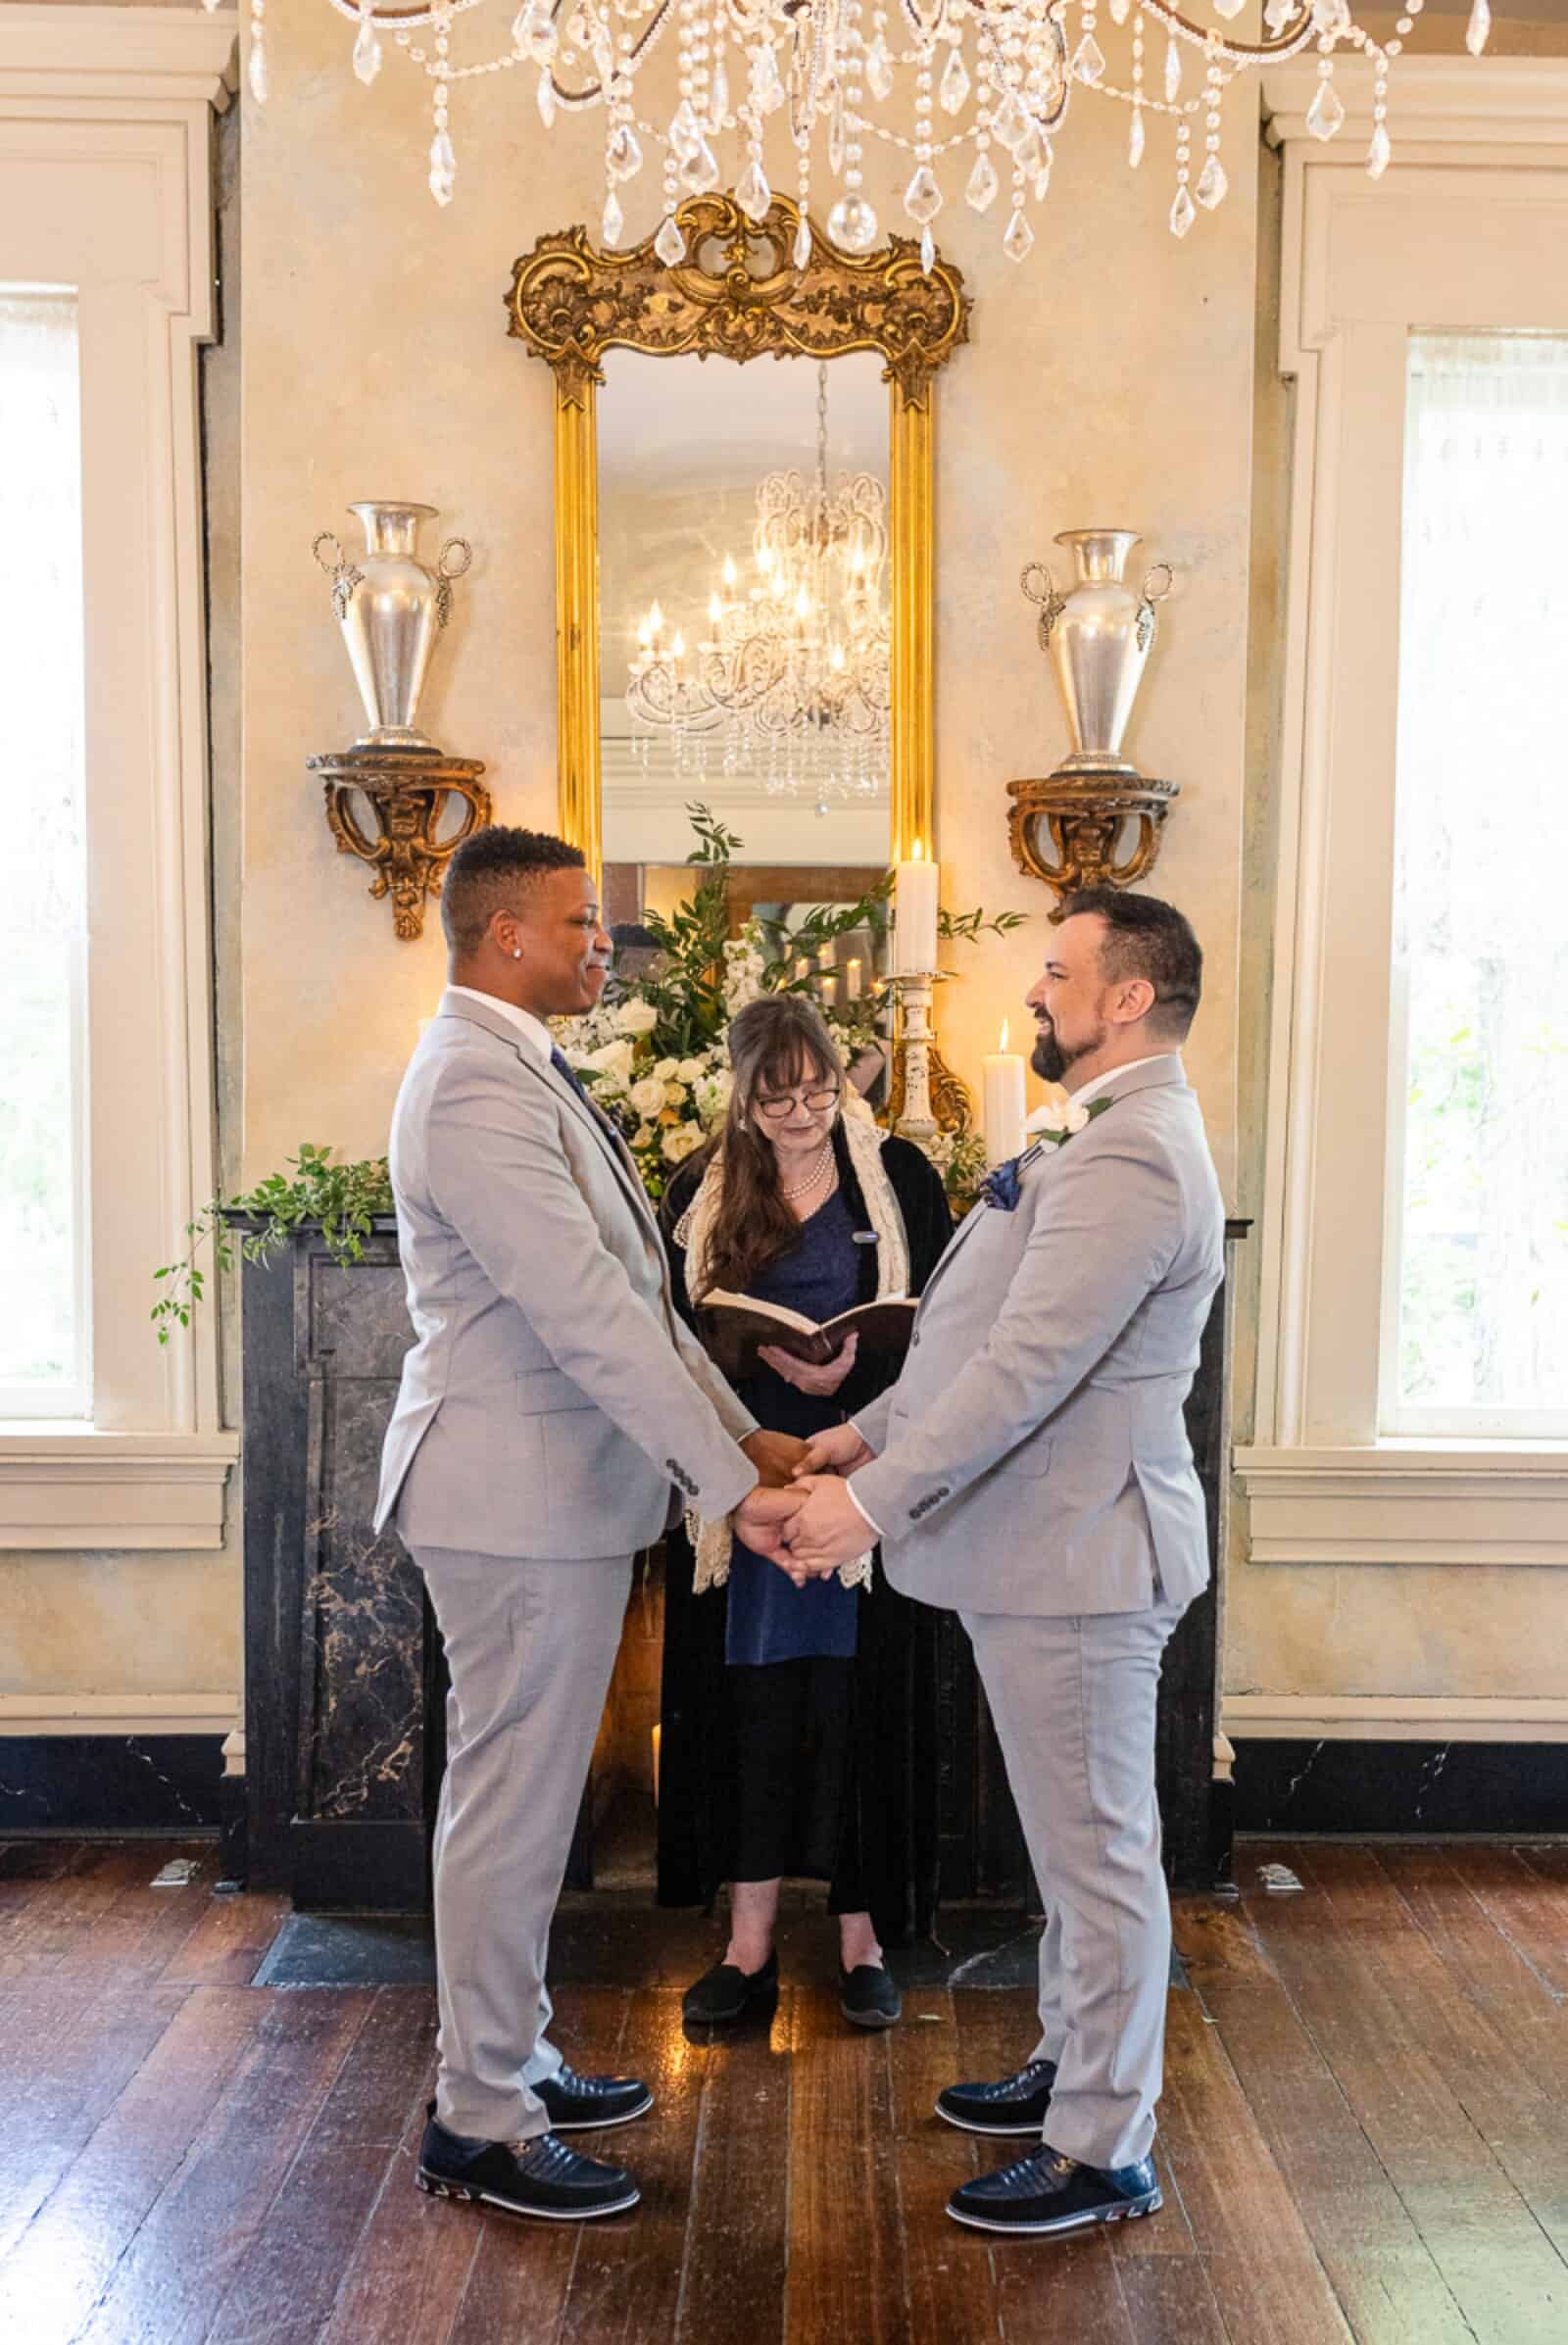 Same-sex male couple exchange vows inside historic mansion